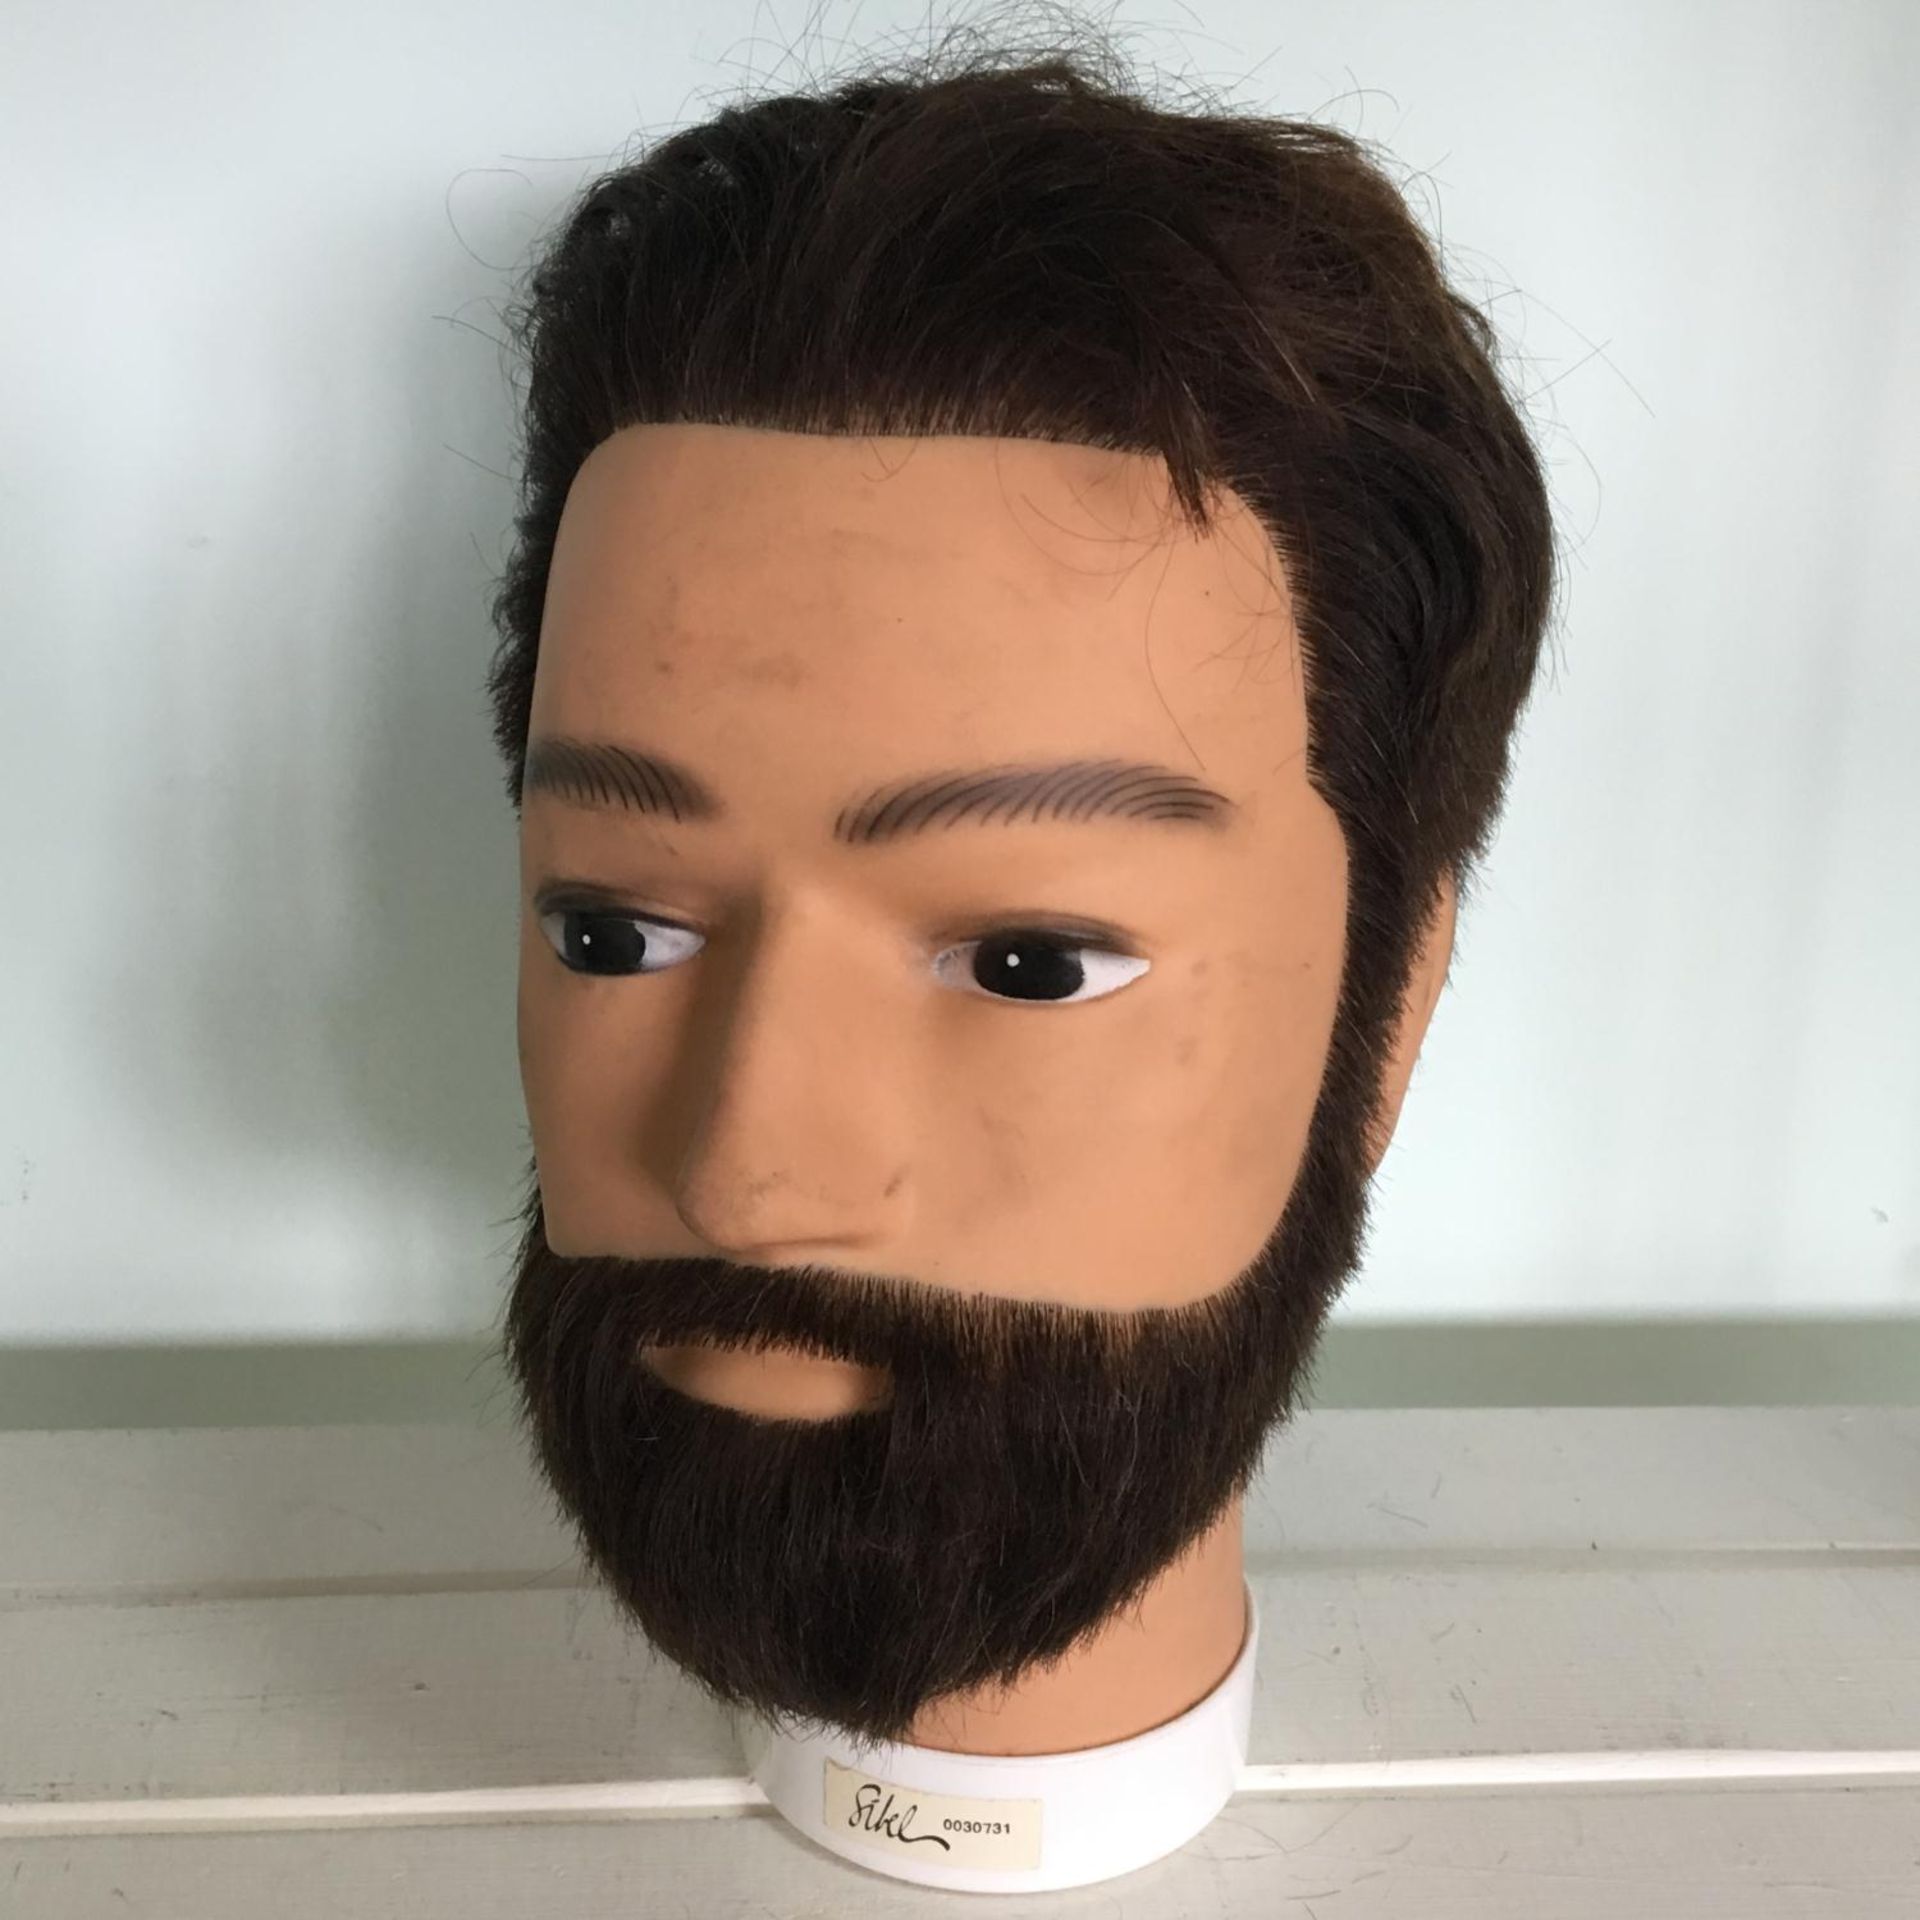 Vintage display model head with real hair. Includes free UK delivery.